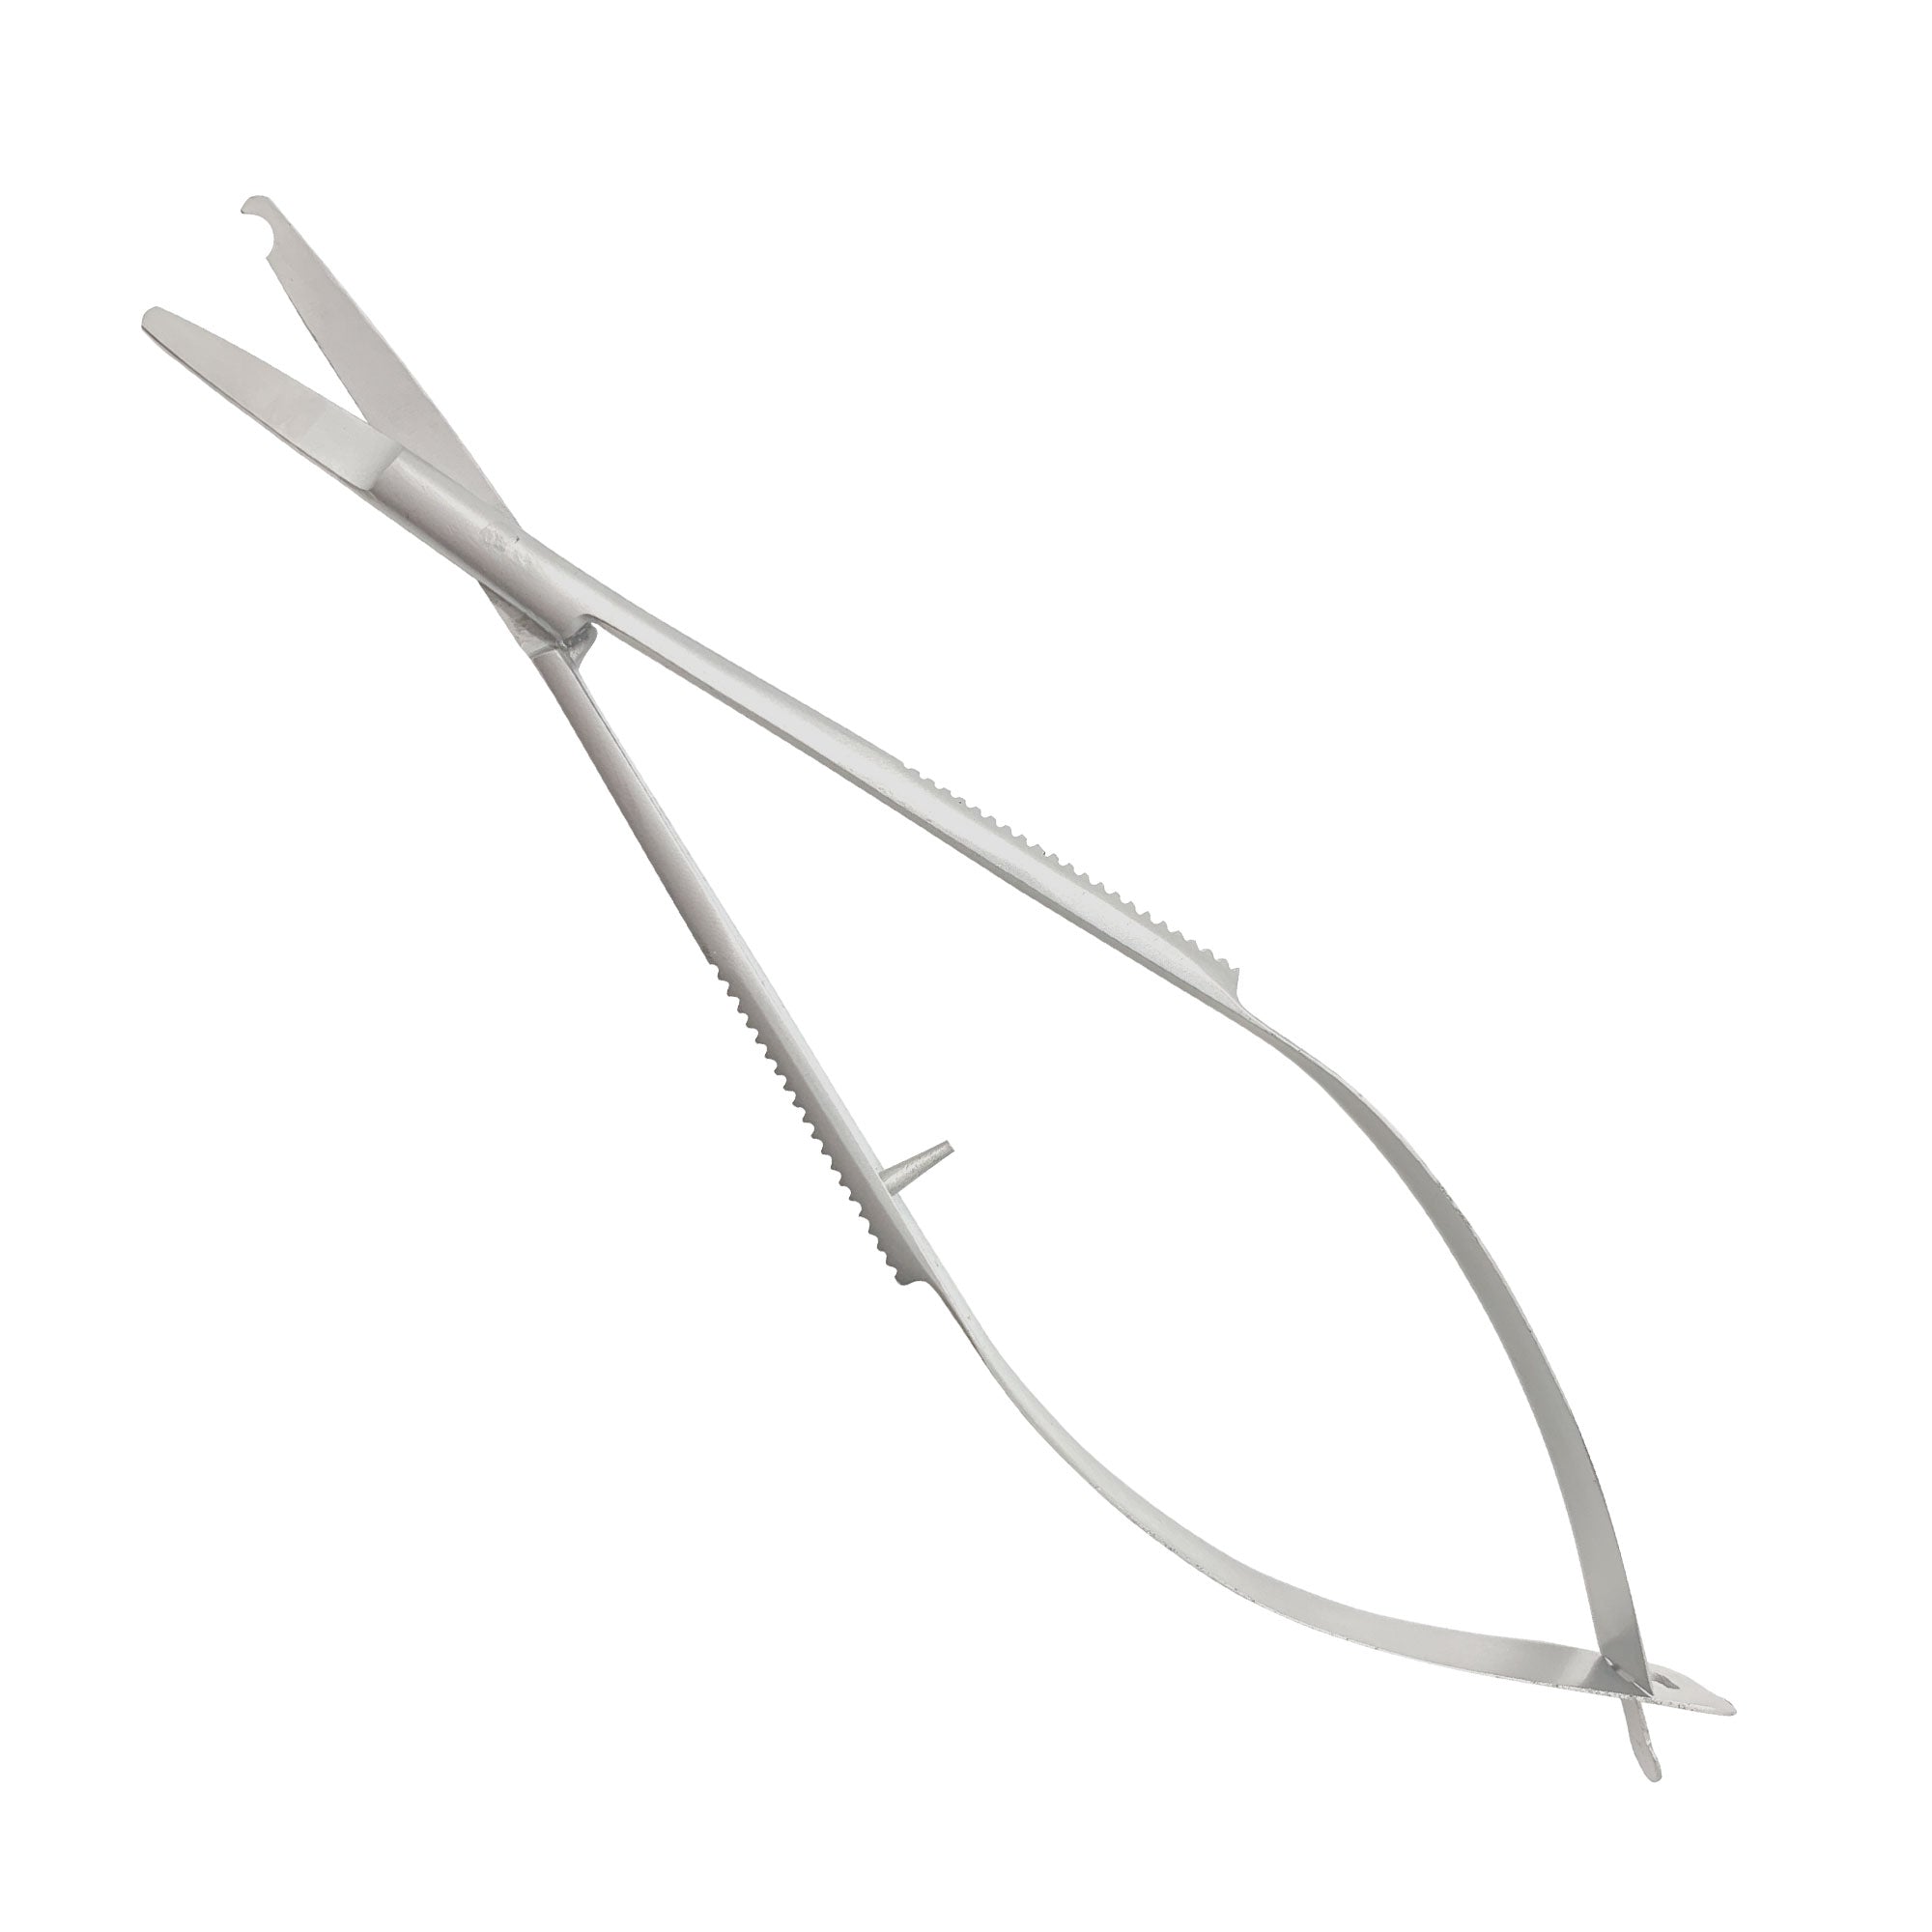 SEWING AND EMBROIDERY scissor 4” str  35302-H